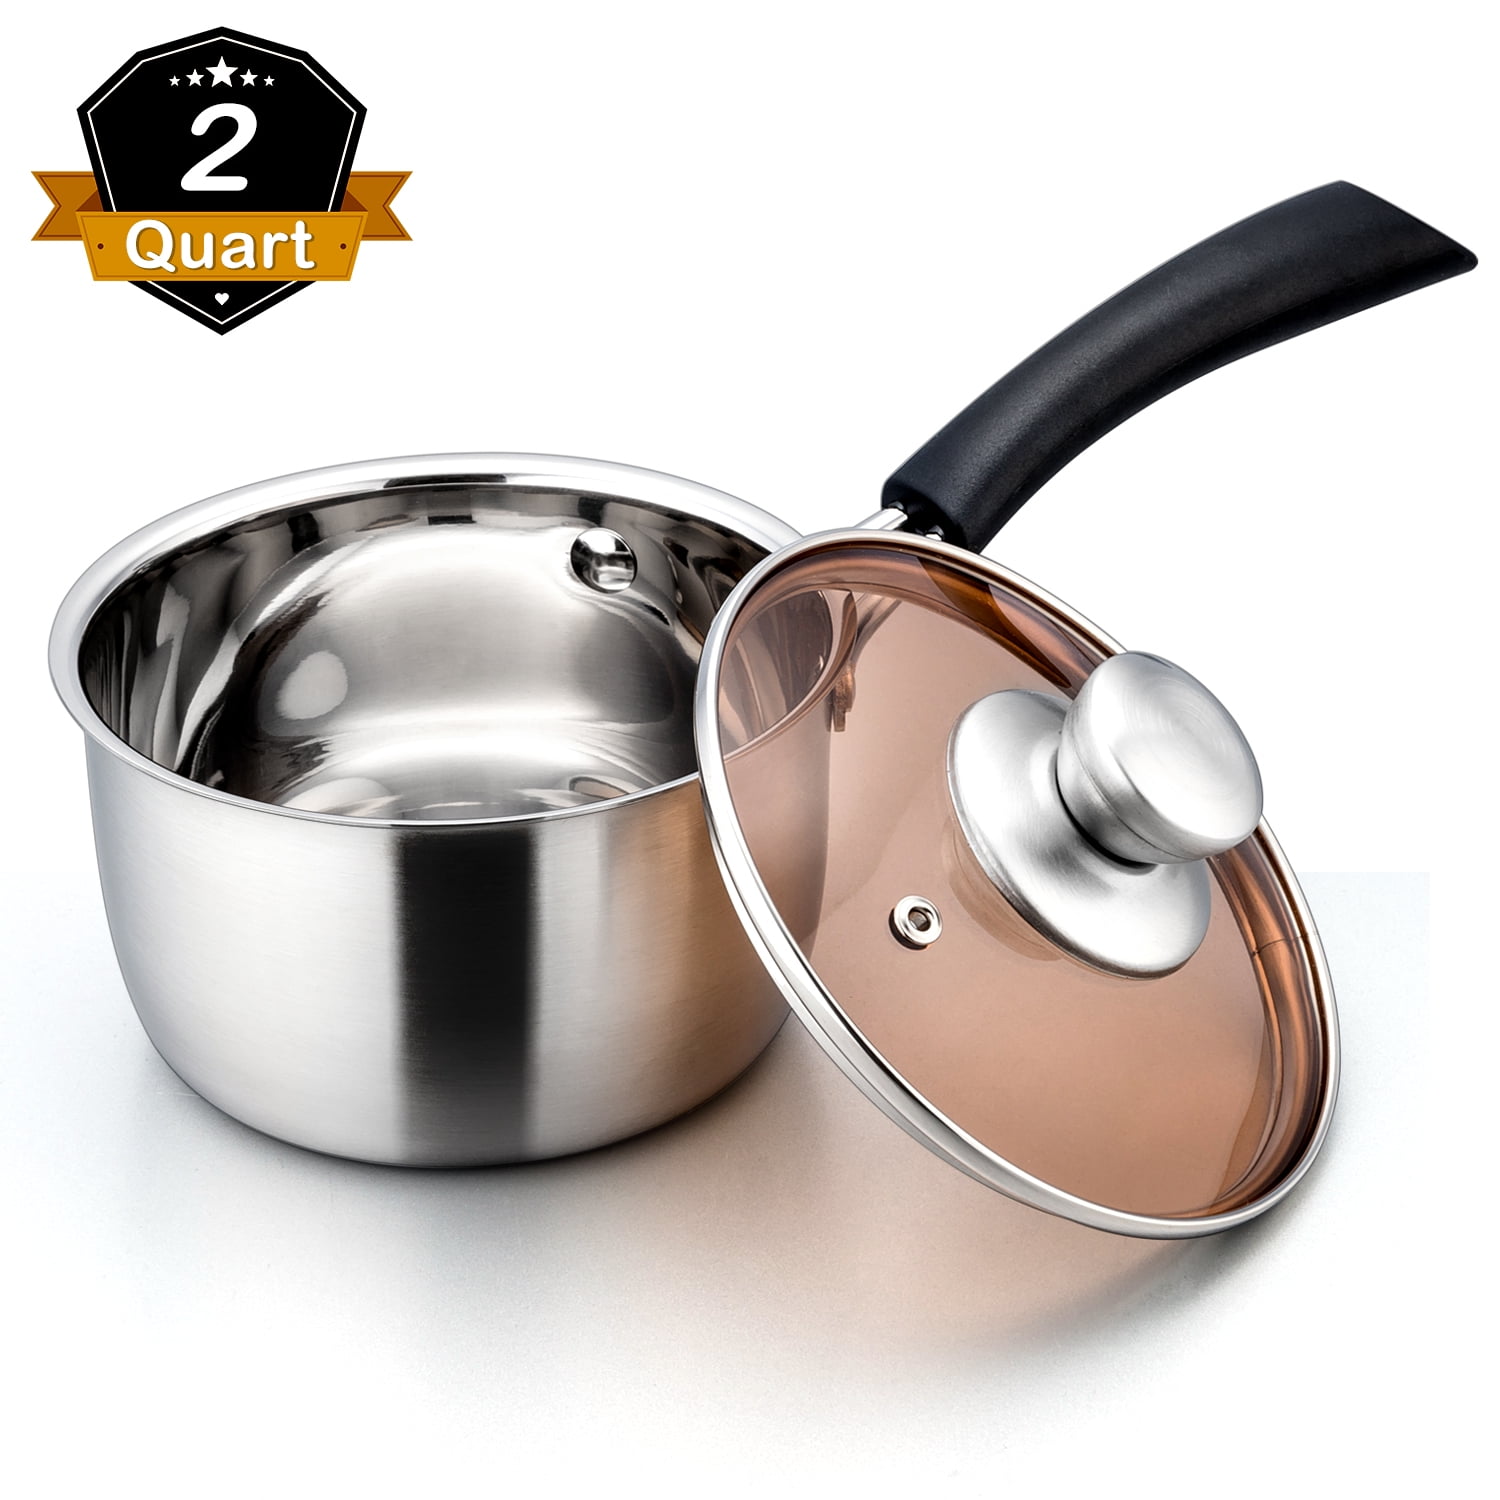 Safinox 18/10 Stainless Steel Tri-Ply Thermo Capsulated Bottom 2-Quart  Sauce Pan with Glass Lid, Induction Ready, Dishwasher Safe 